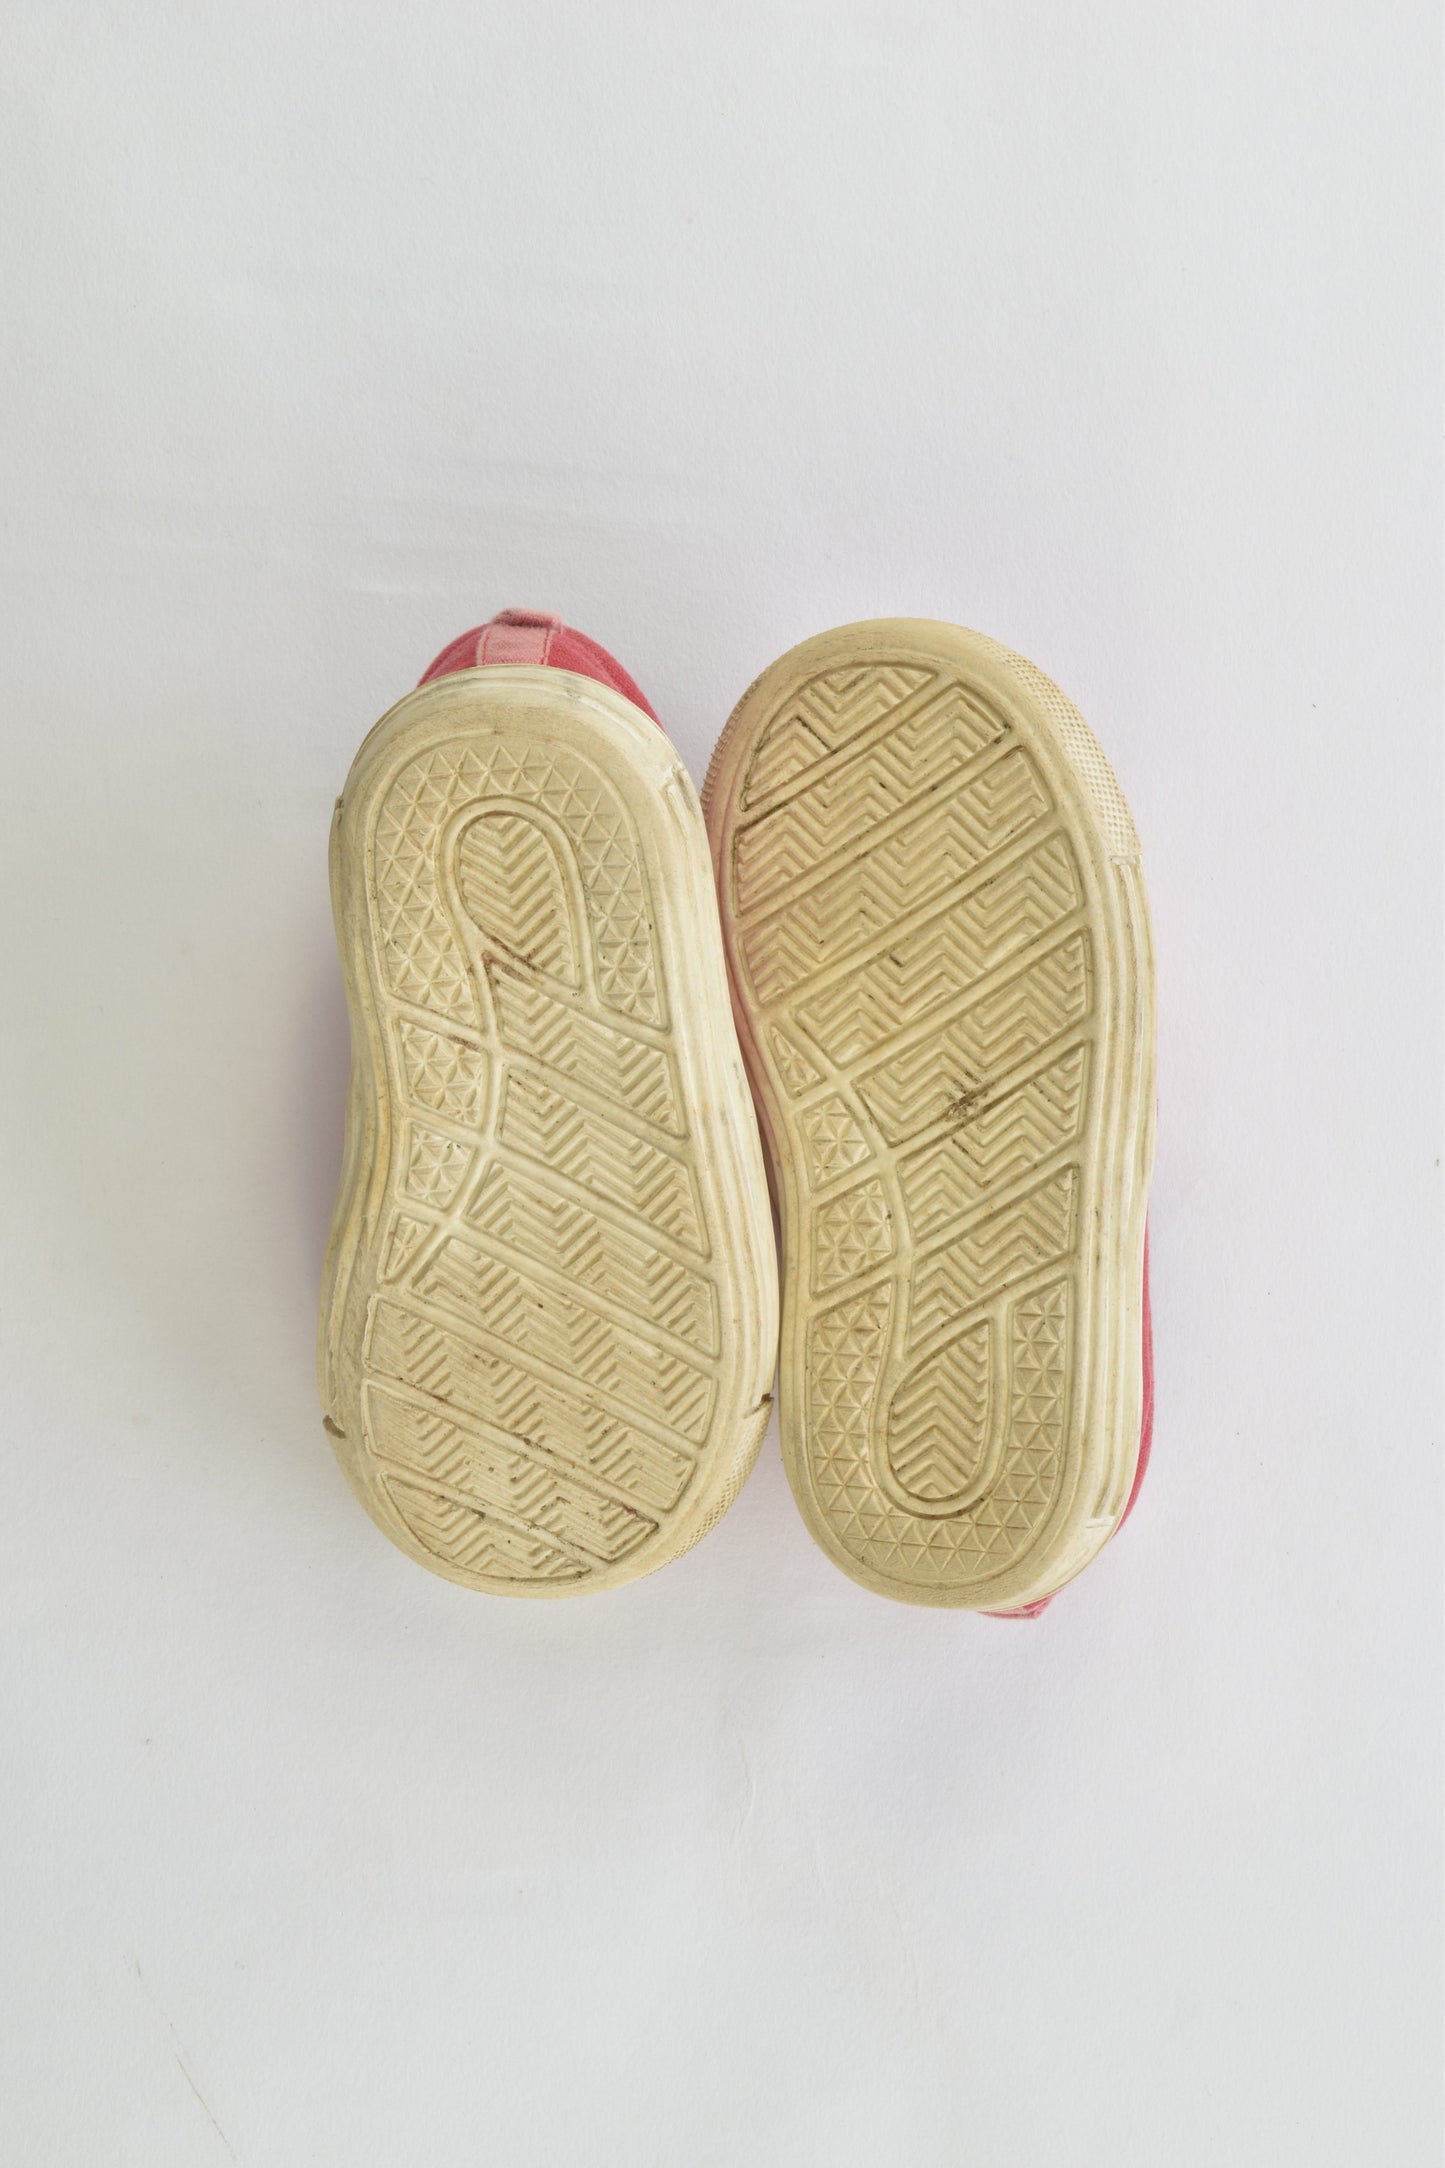 Country Road Size 22 (18-24 months) Canvas Shoes